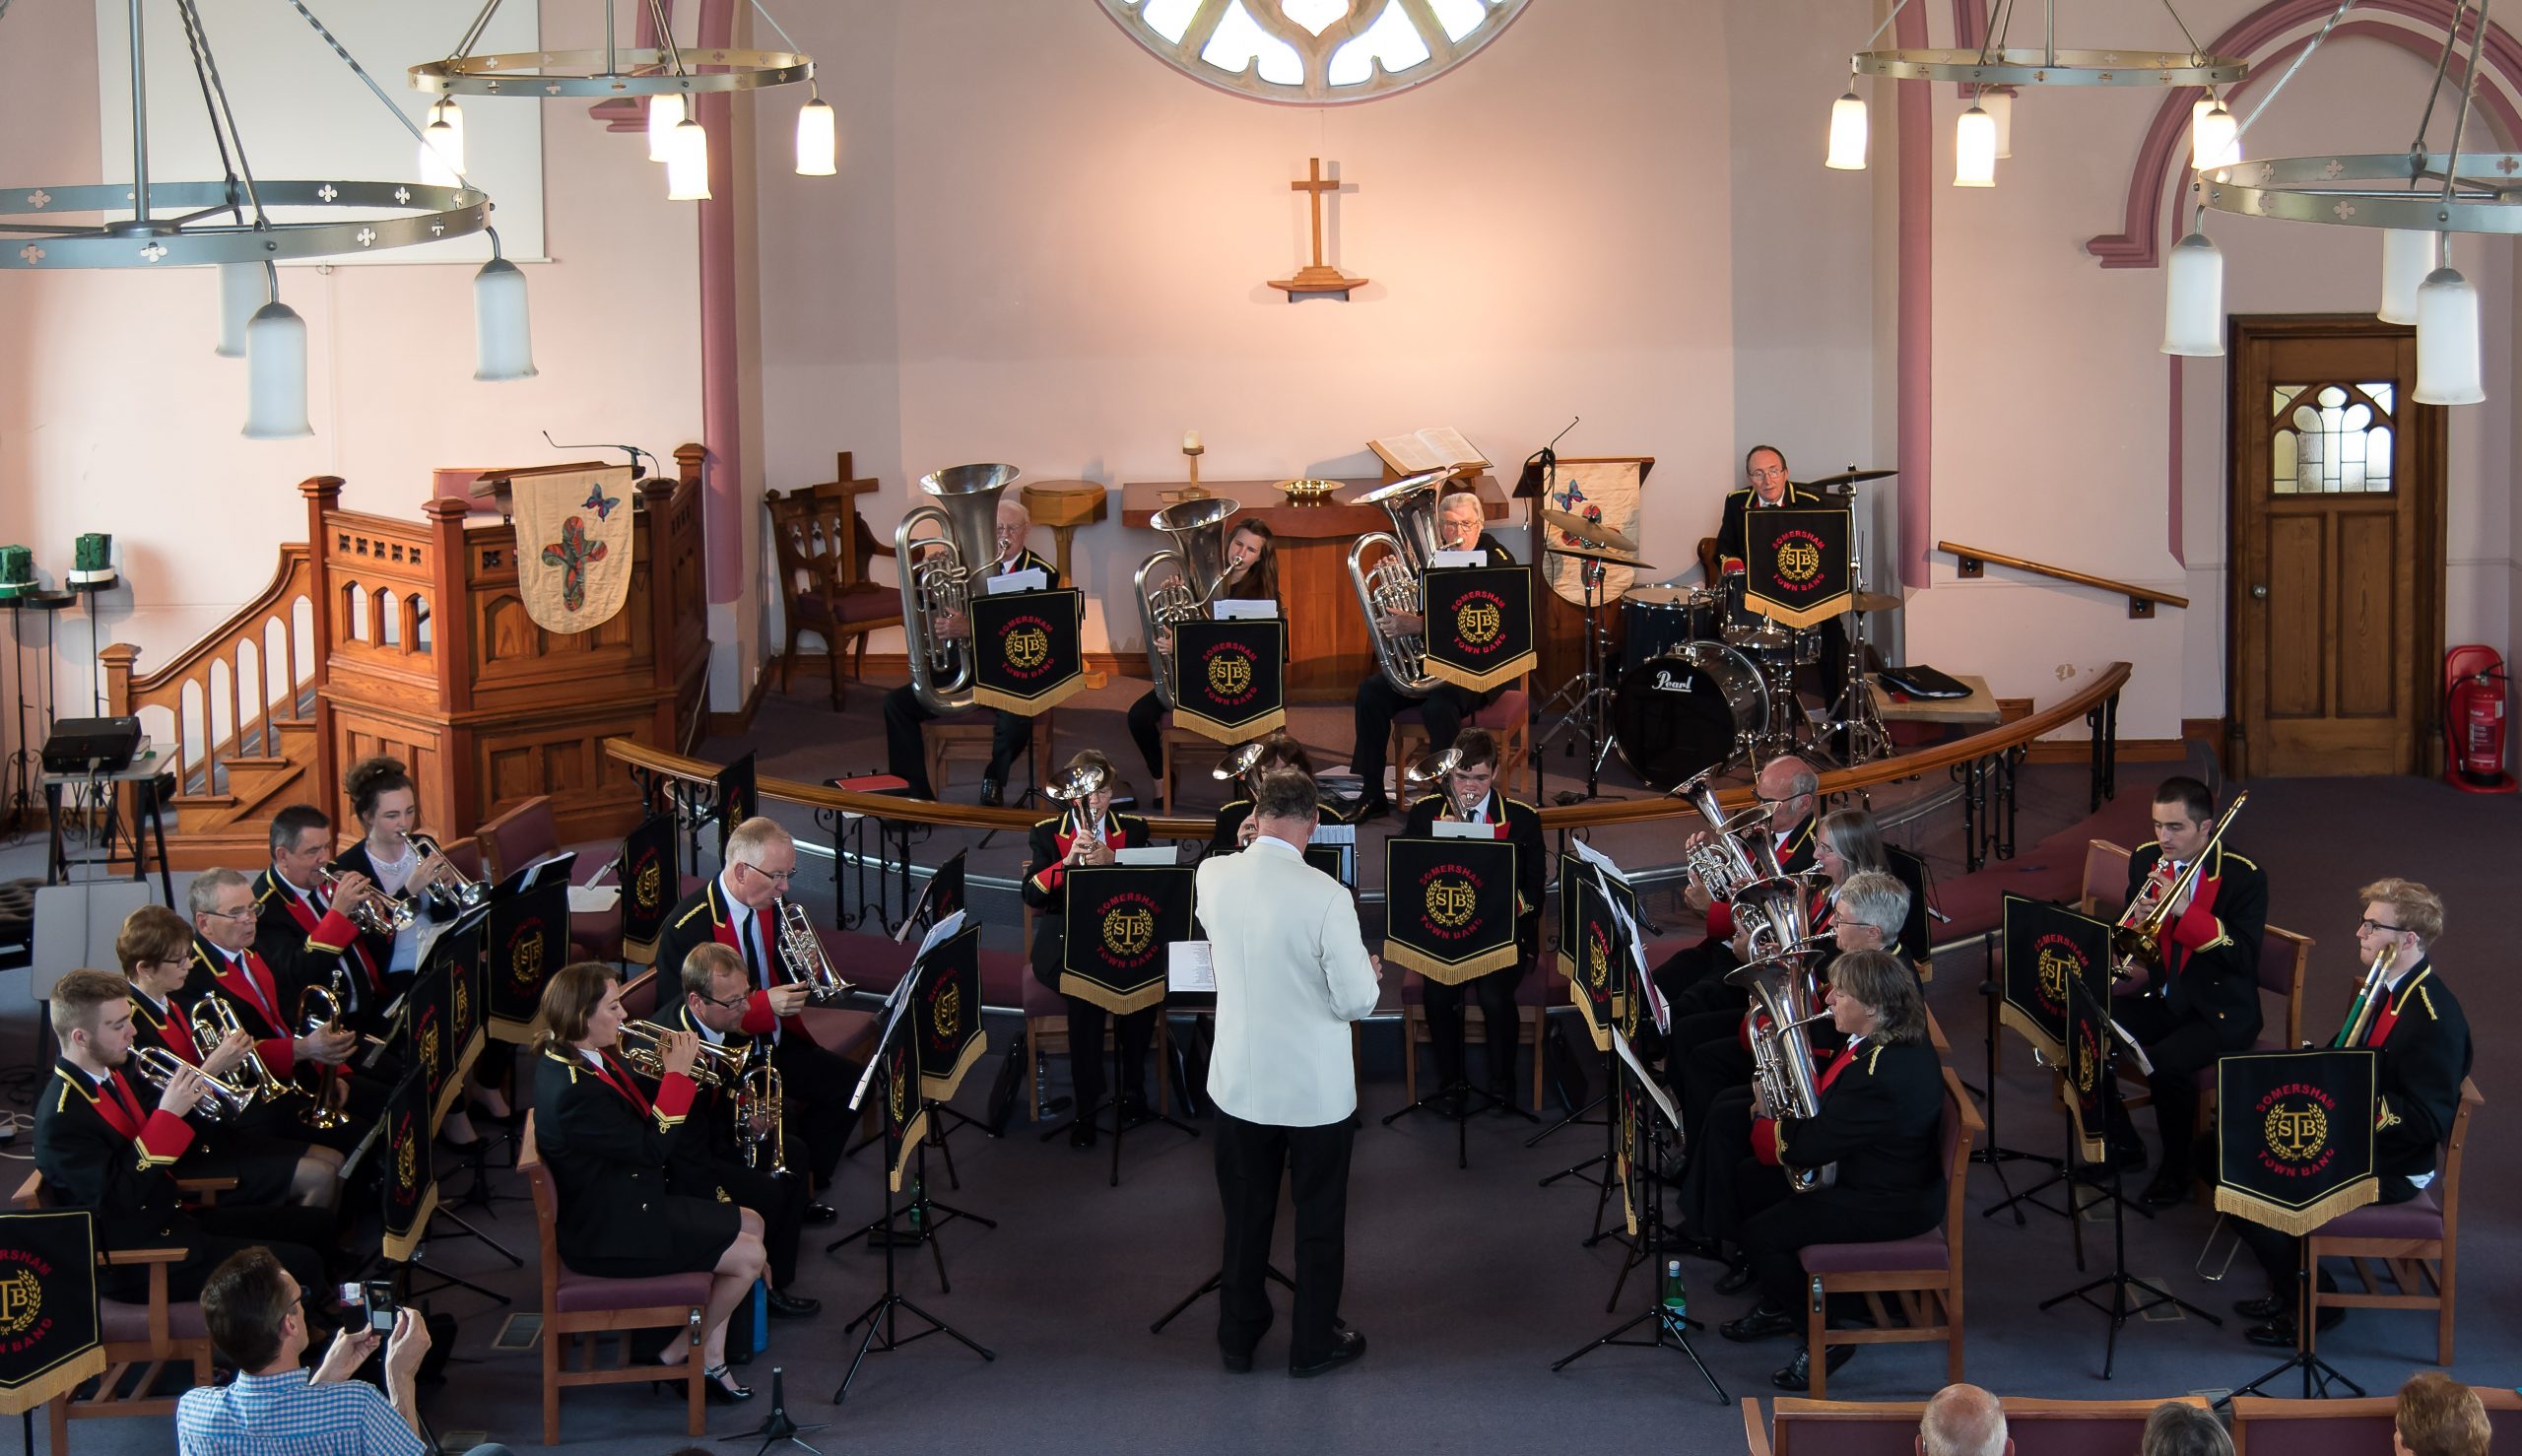 WELCOME TO THE HOME OF THE SOMERSHAM TOWN BAND